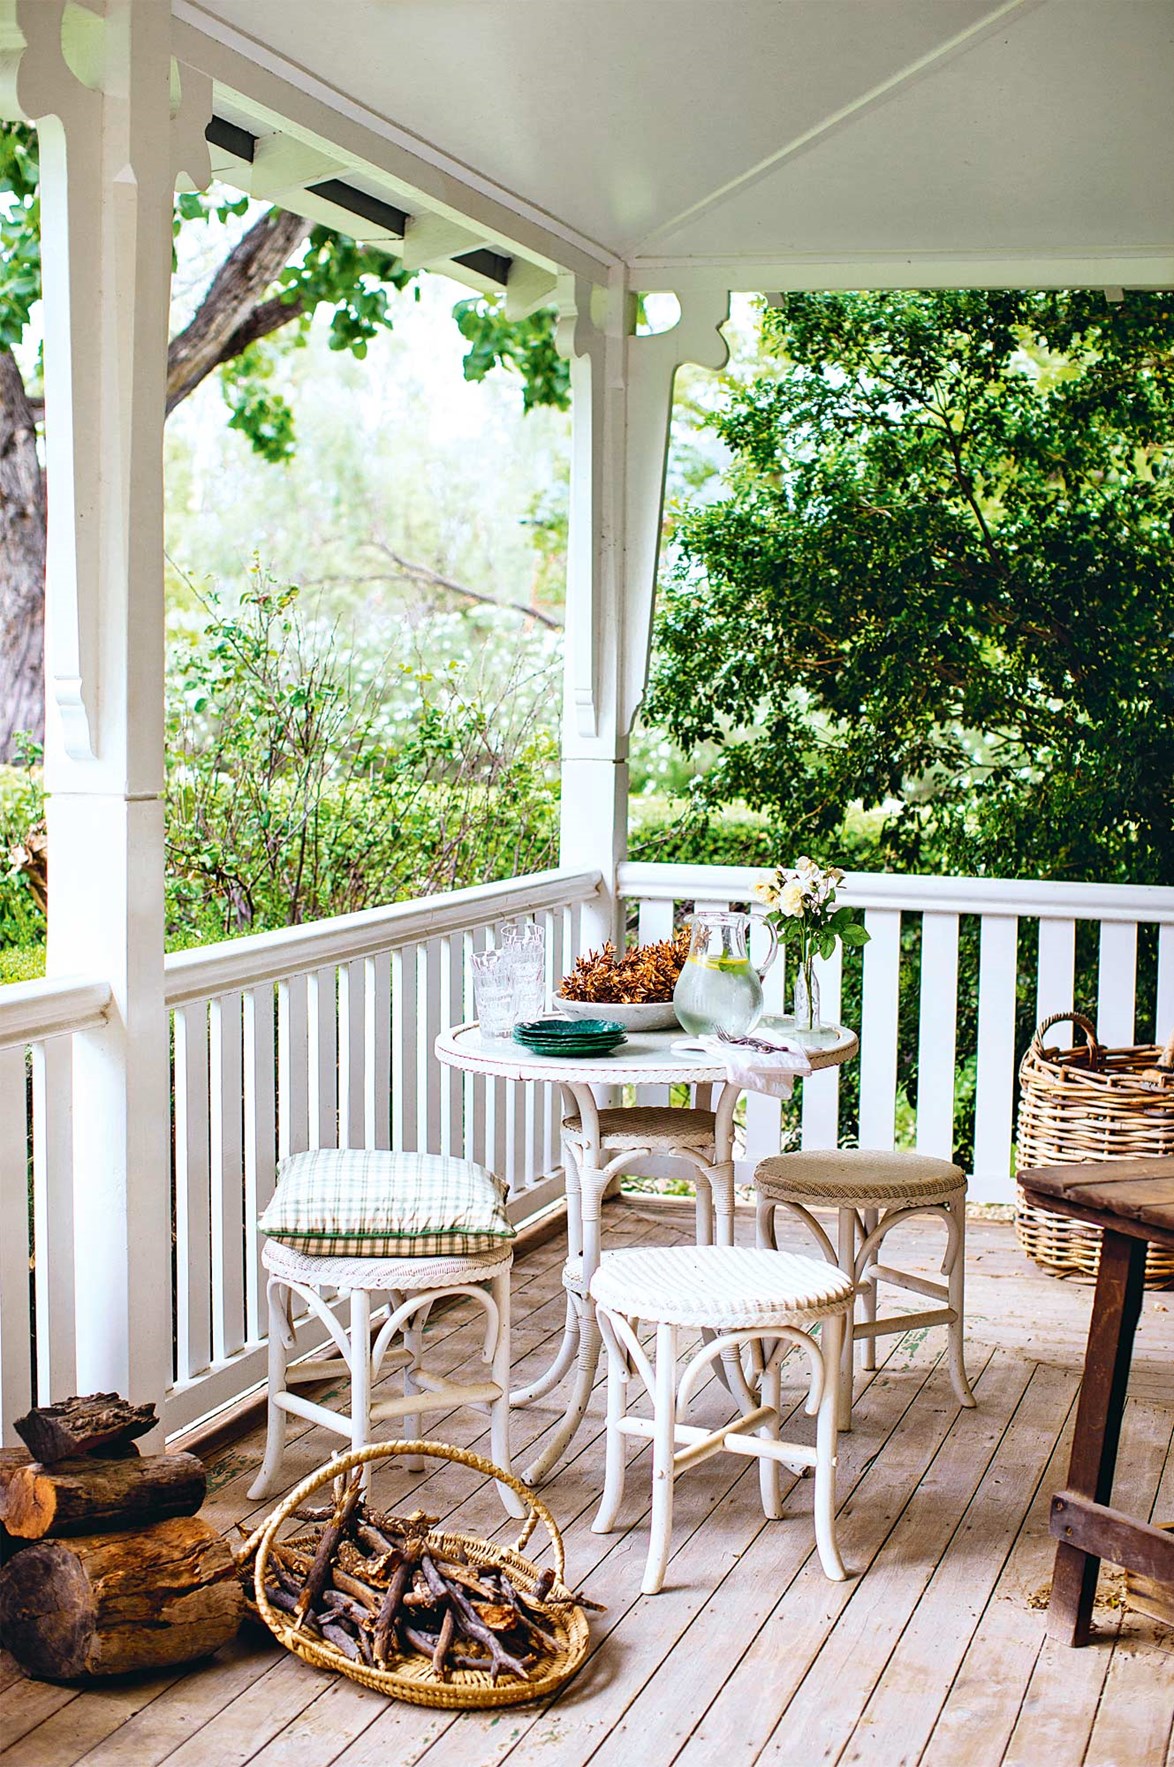 If verandahs could talk! Four generations of the Livingstone family have enjoyed this leafy corner at the [stately Boolooroo homestead](https://www.homestolove.com.au/inviting-100-year-old-homestead-13775|target="_blank") near Moree. It's also where the family keeps firewood and kindling during winter. *Photo: Kara Rosenlund*